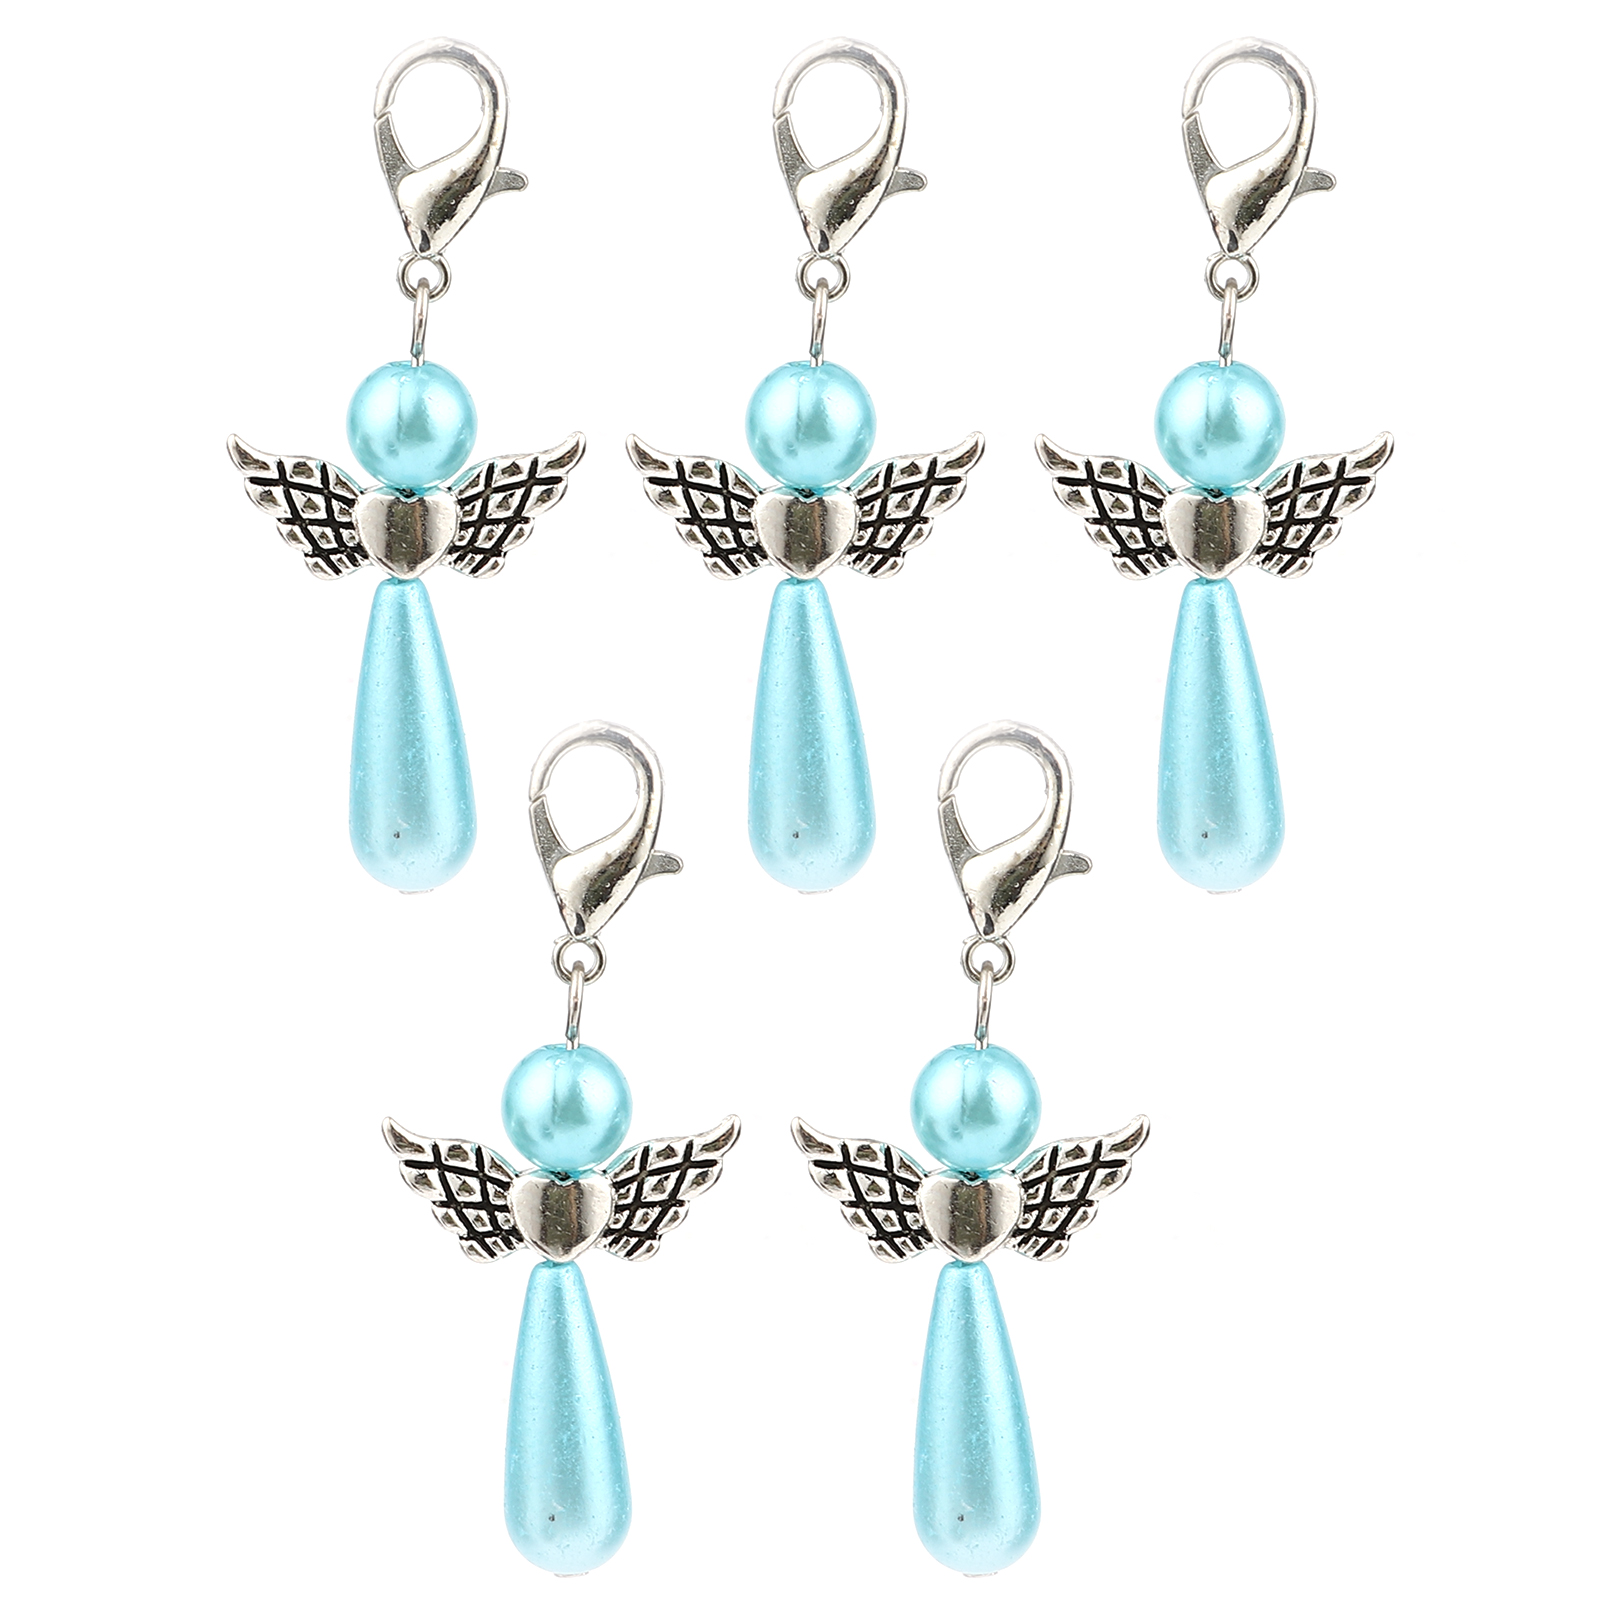 Picture of Zinc Based Alloy Knitting Stitch Markers Angel Antique Silver Color Blue 38mm x 22mm, 5 PCs